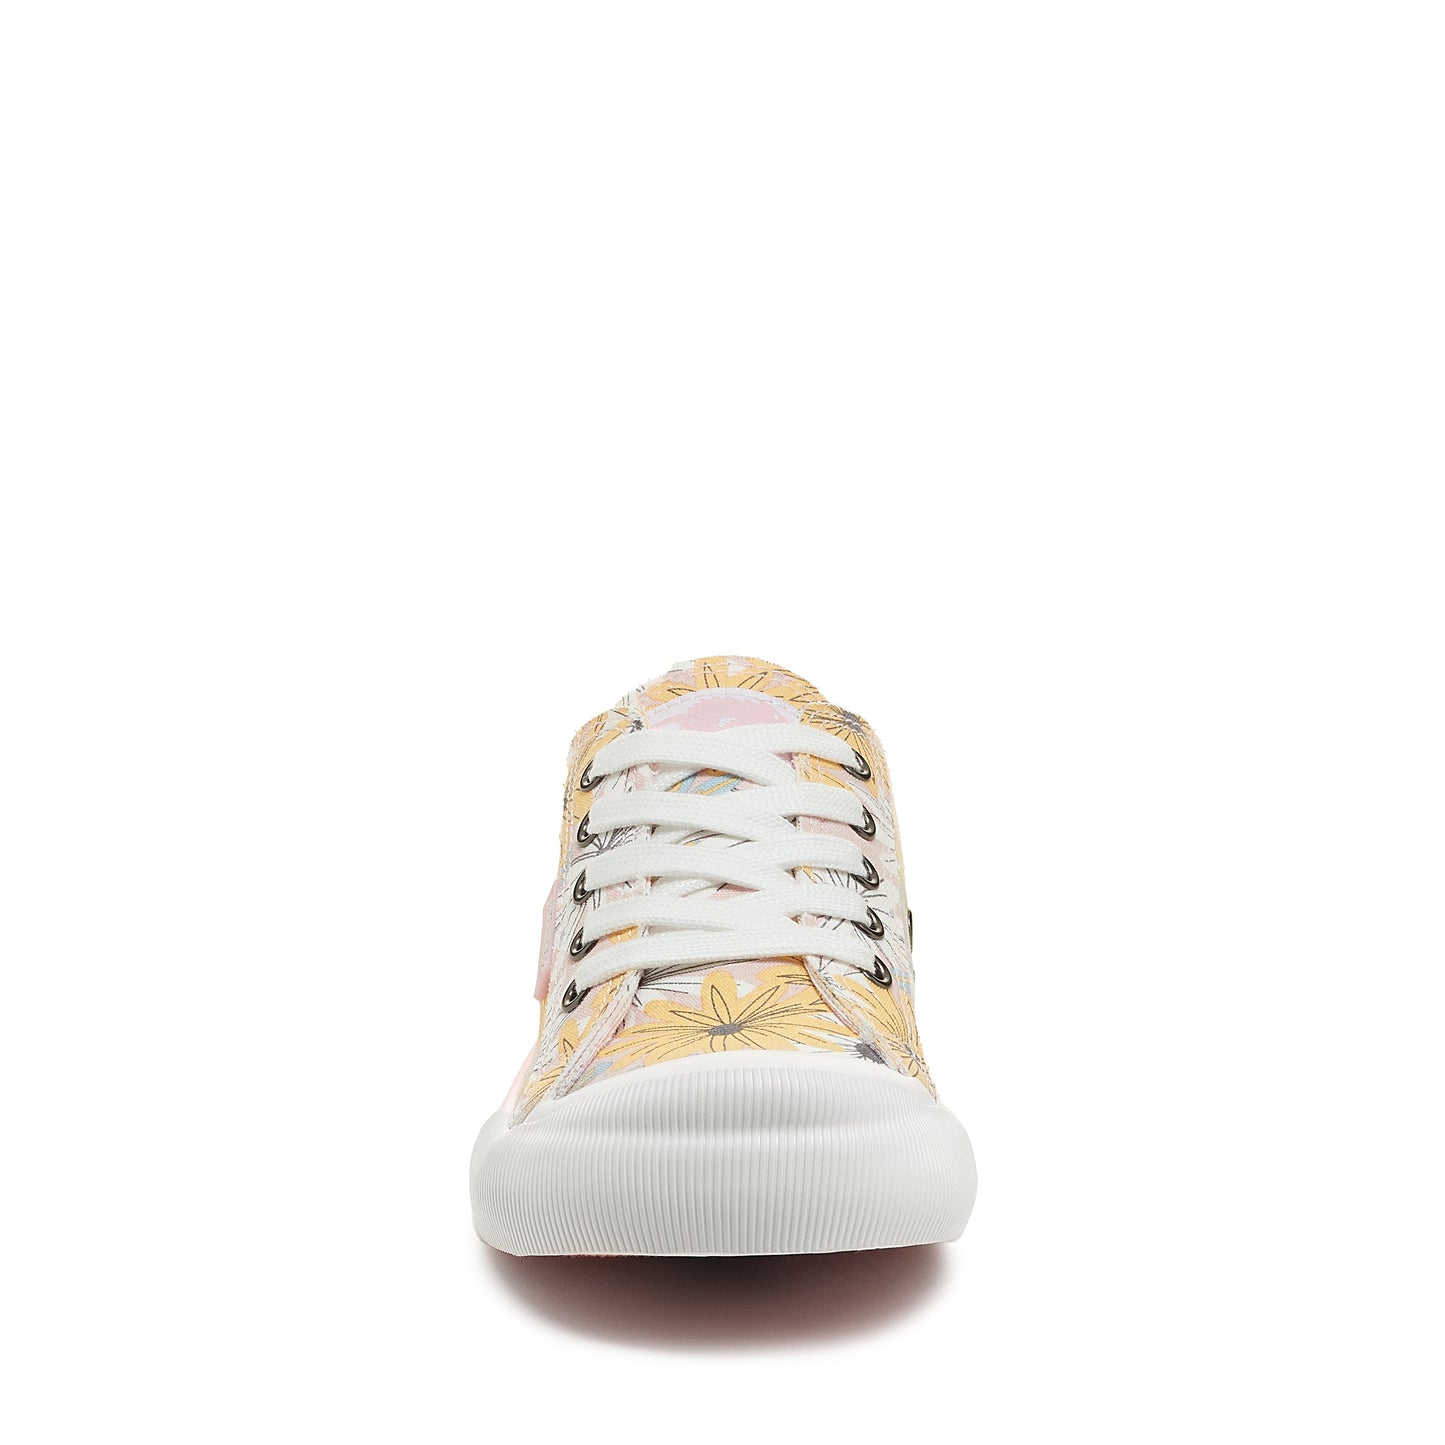 Jazzin Floral Pink Trainers